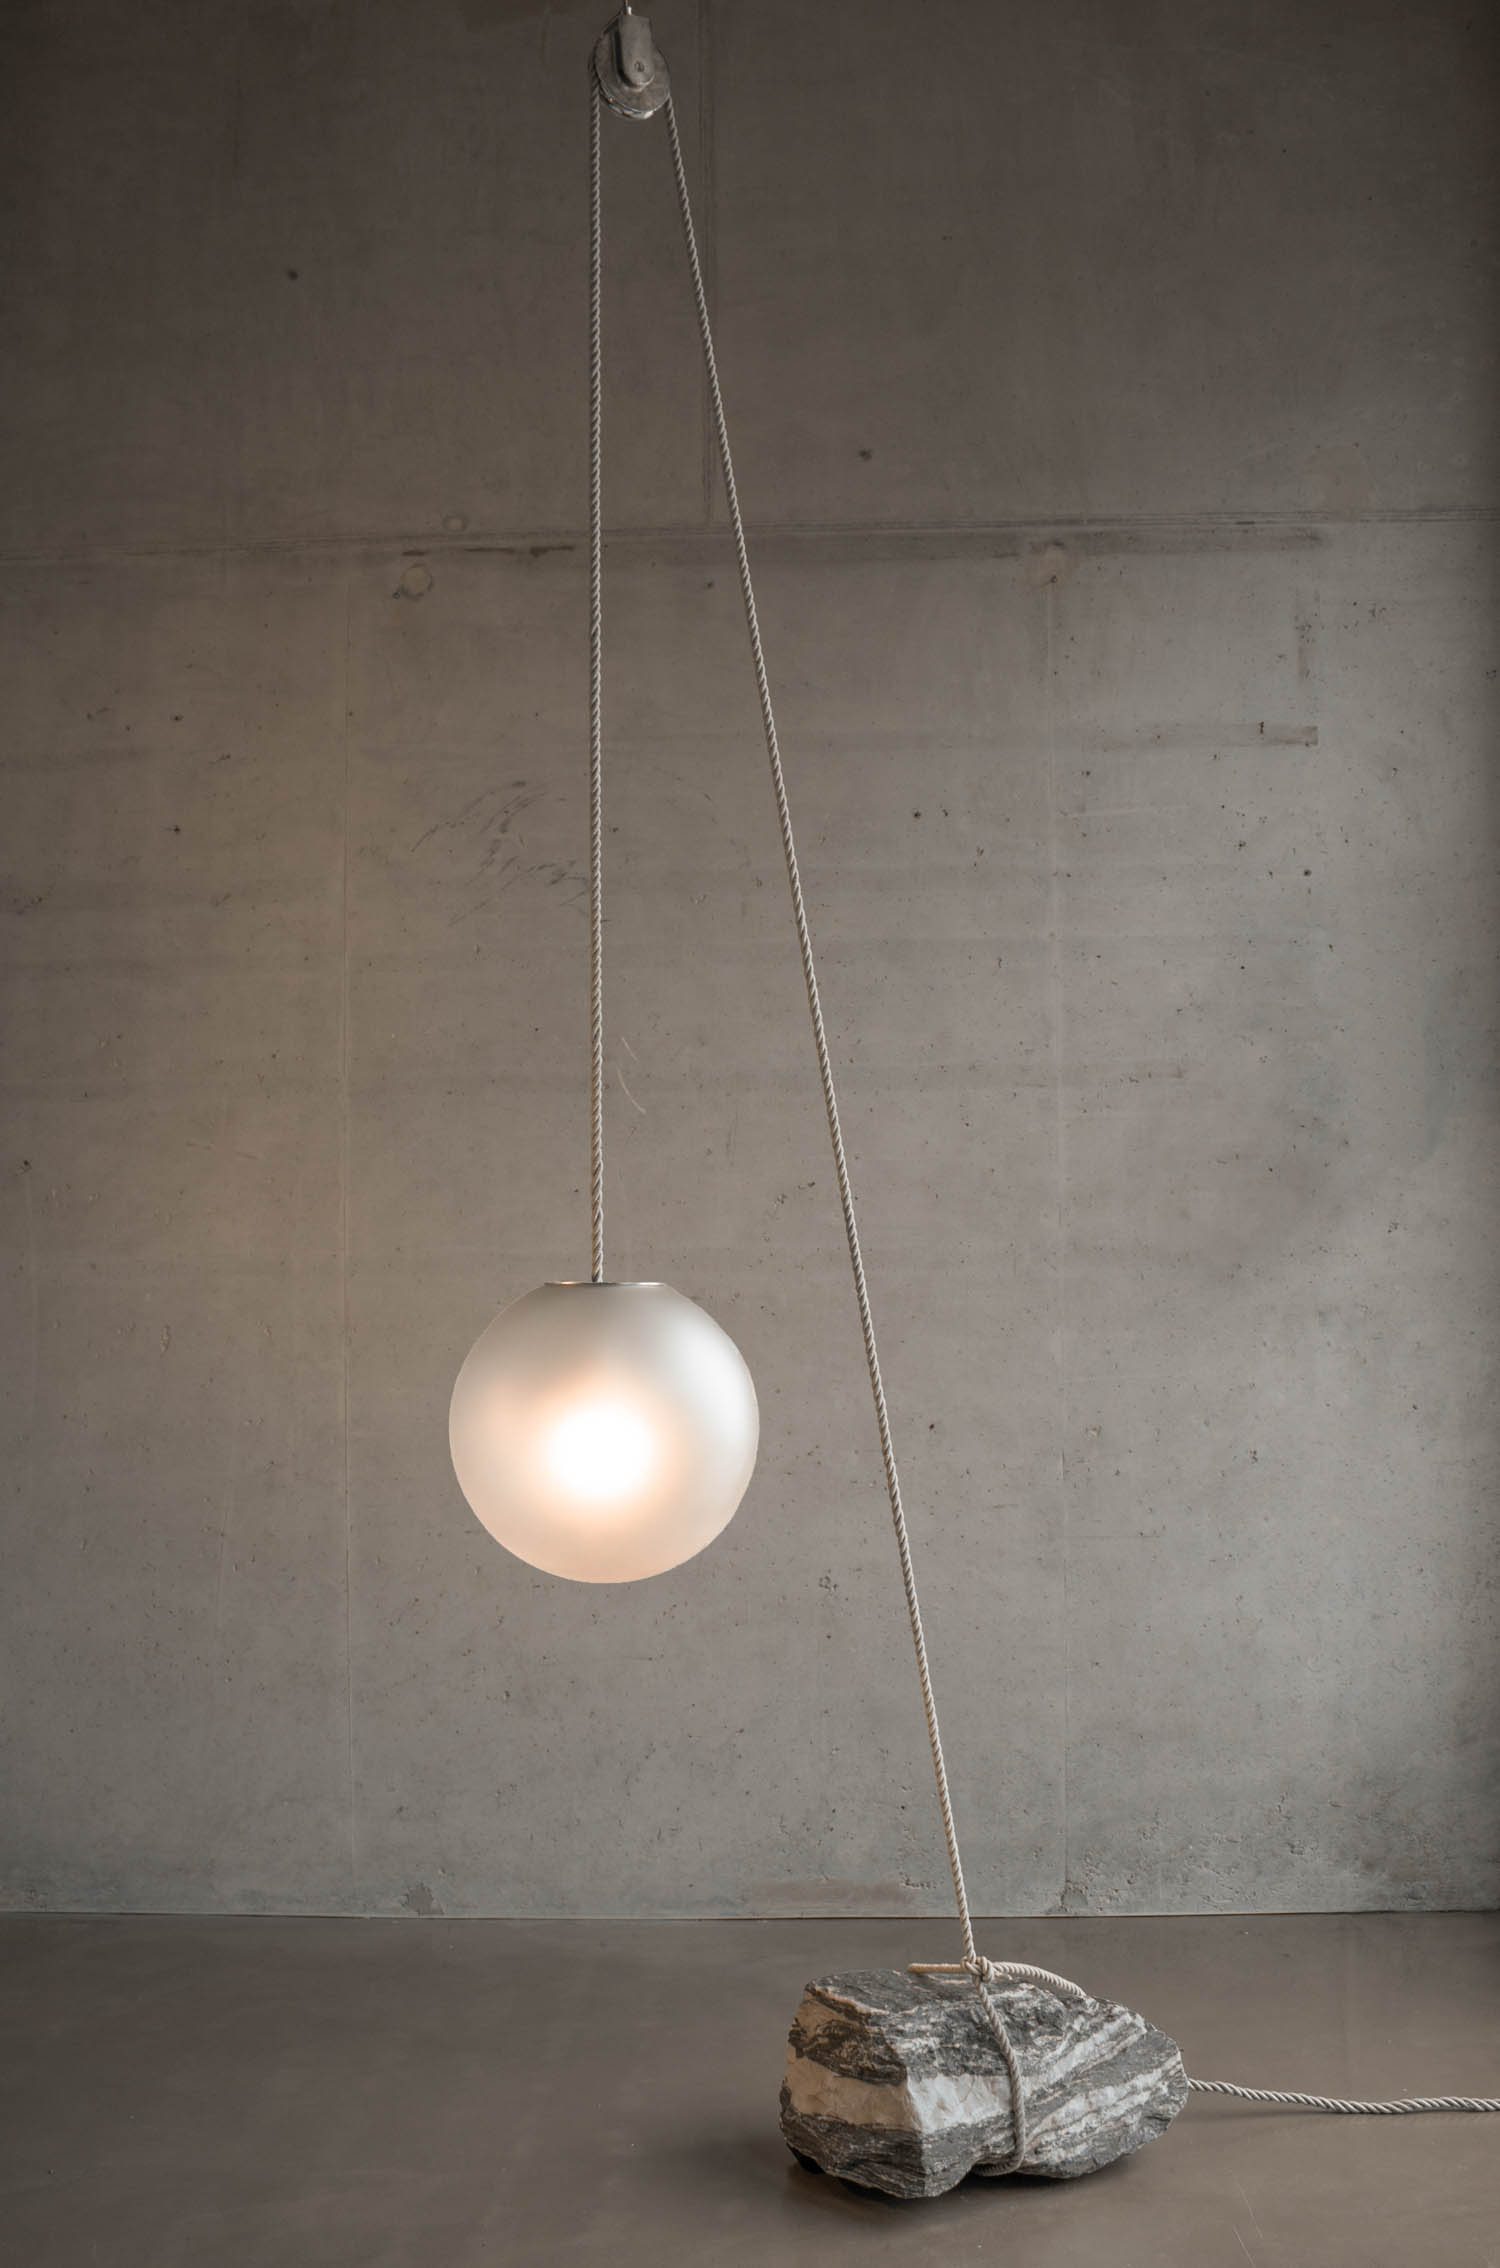 A pendant light hanging from a delicate chain